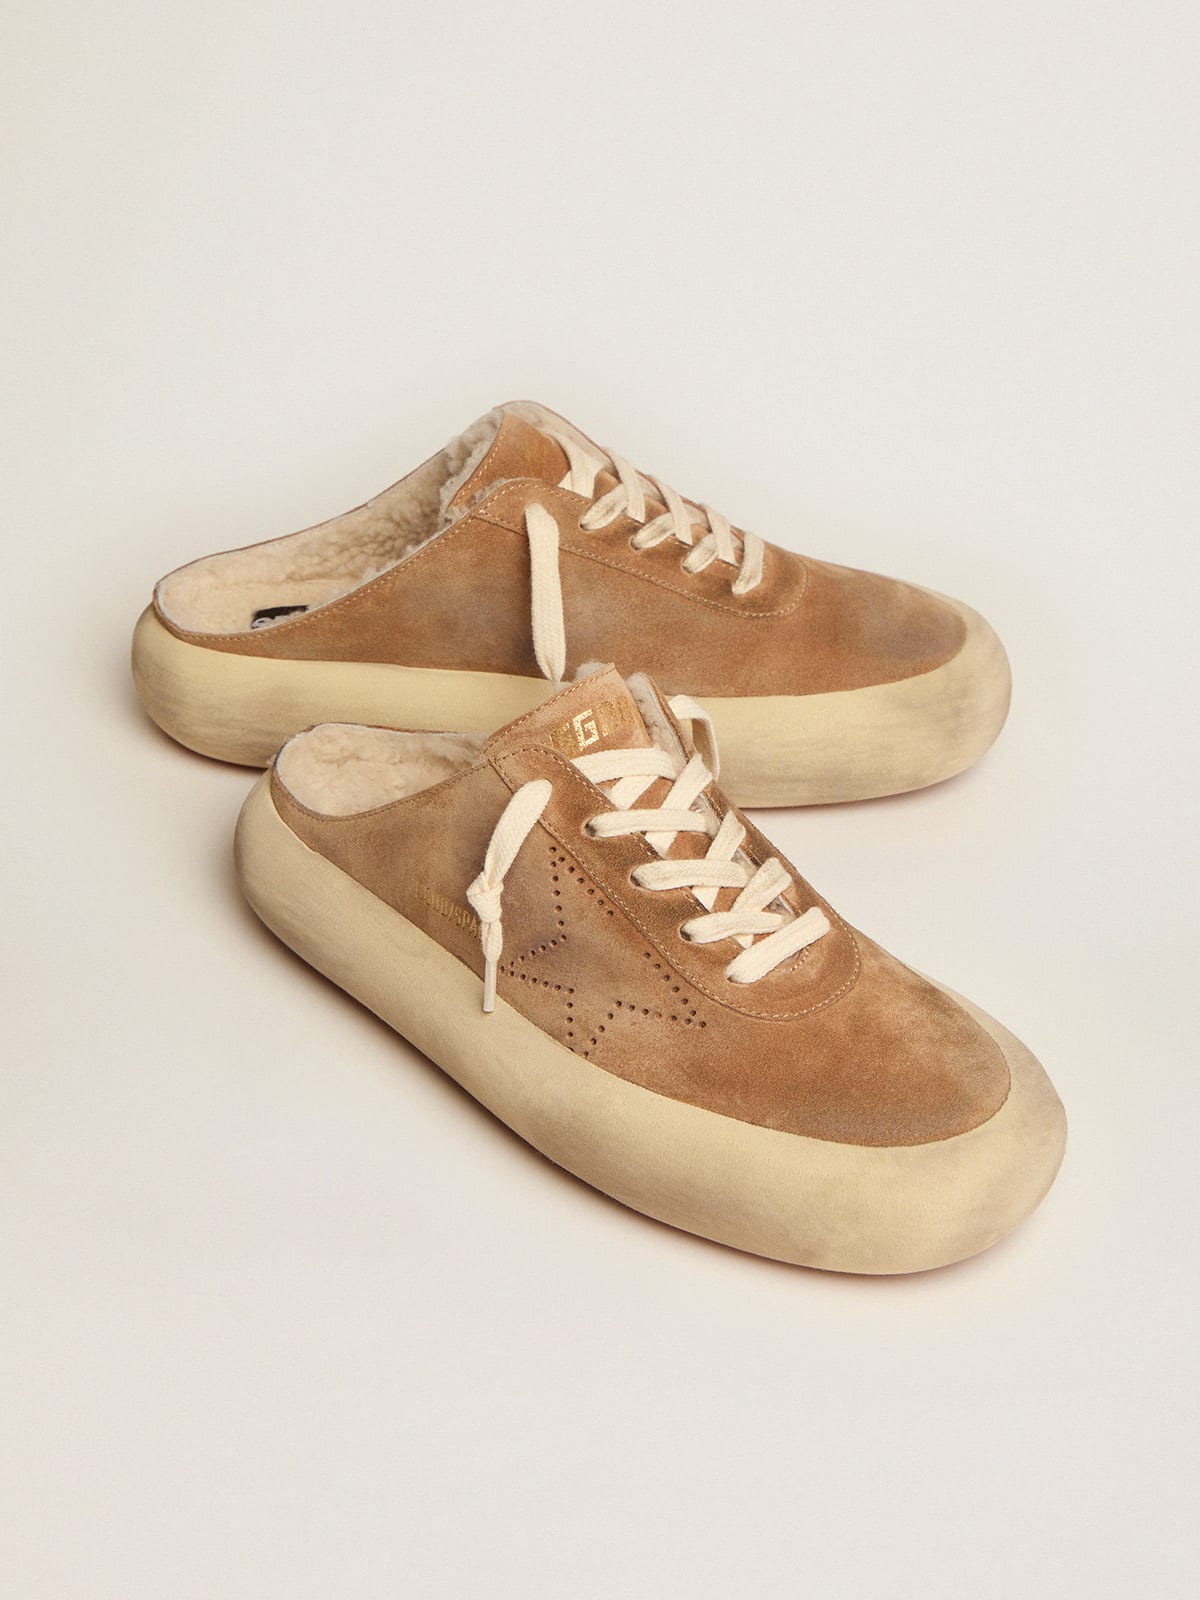 Golden Goose - Women's Space-Star Sabot shoes in tobacco-colored suede with shearling lining in 